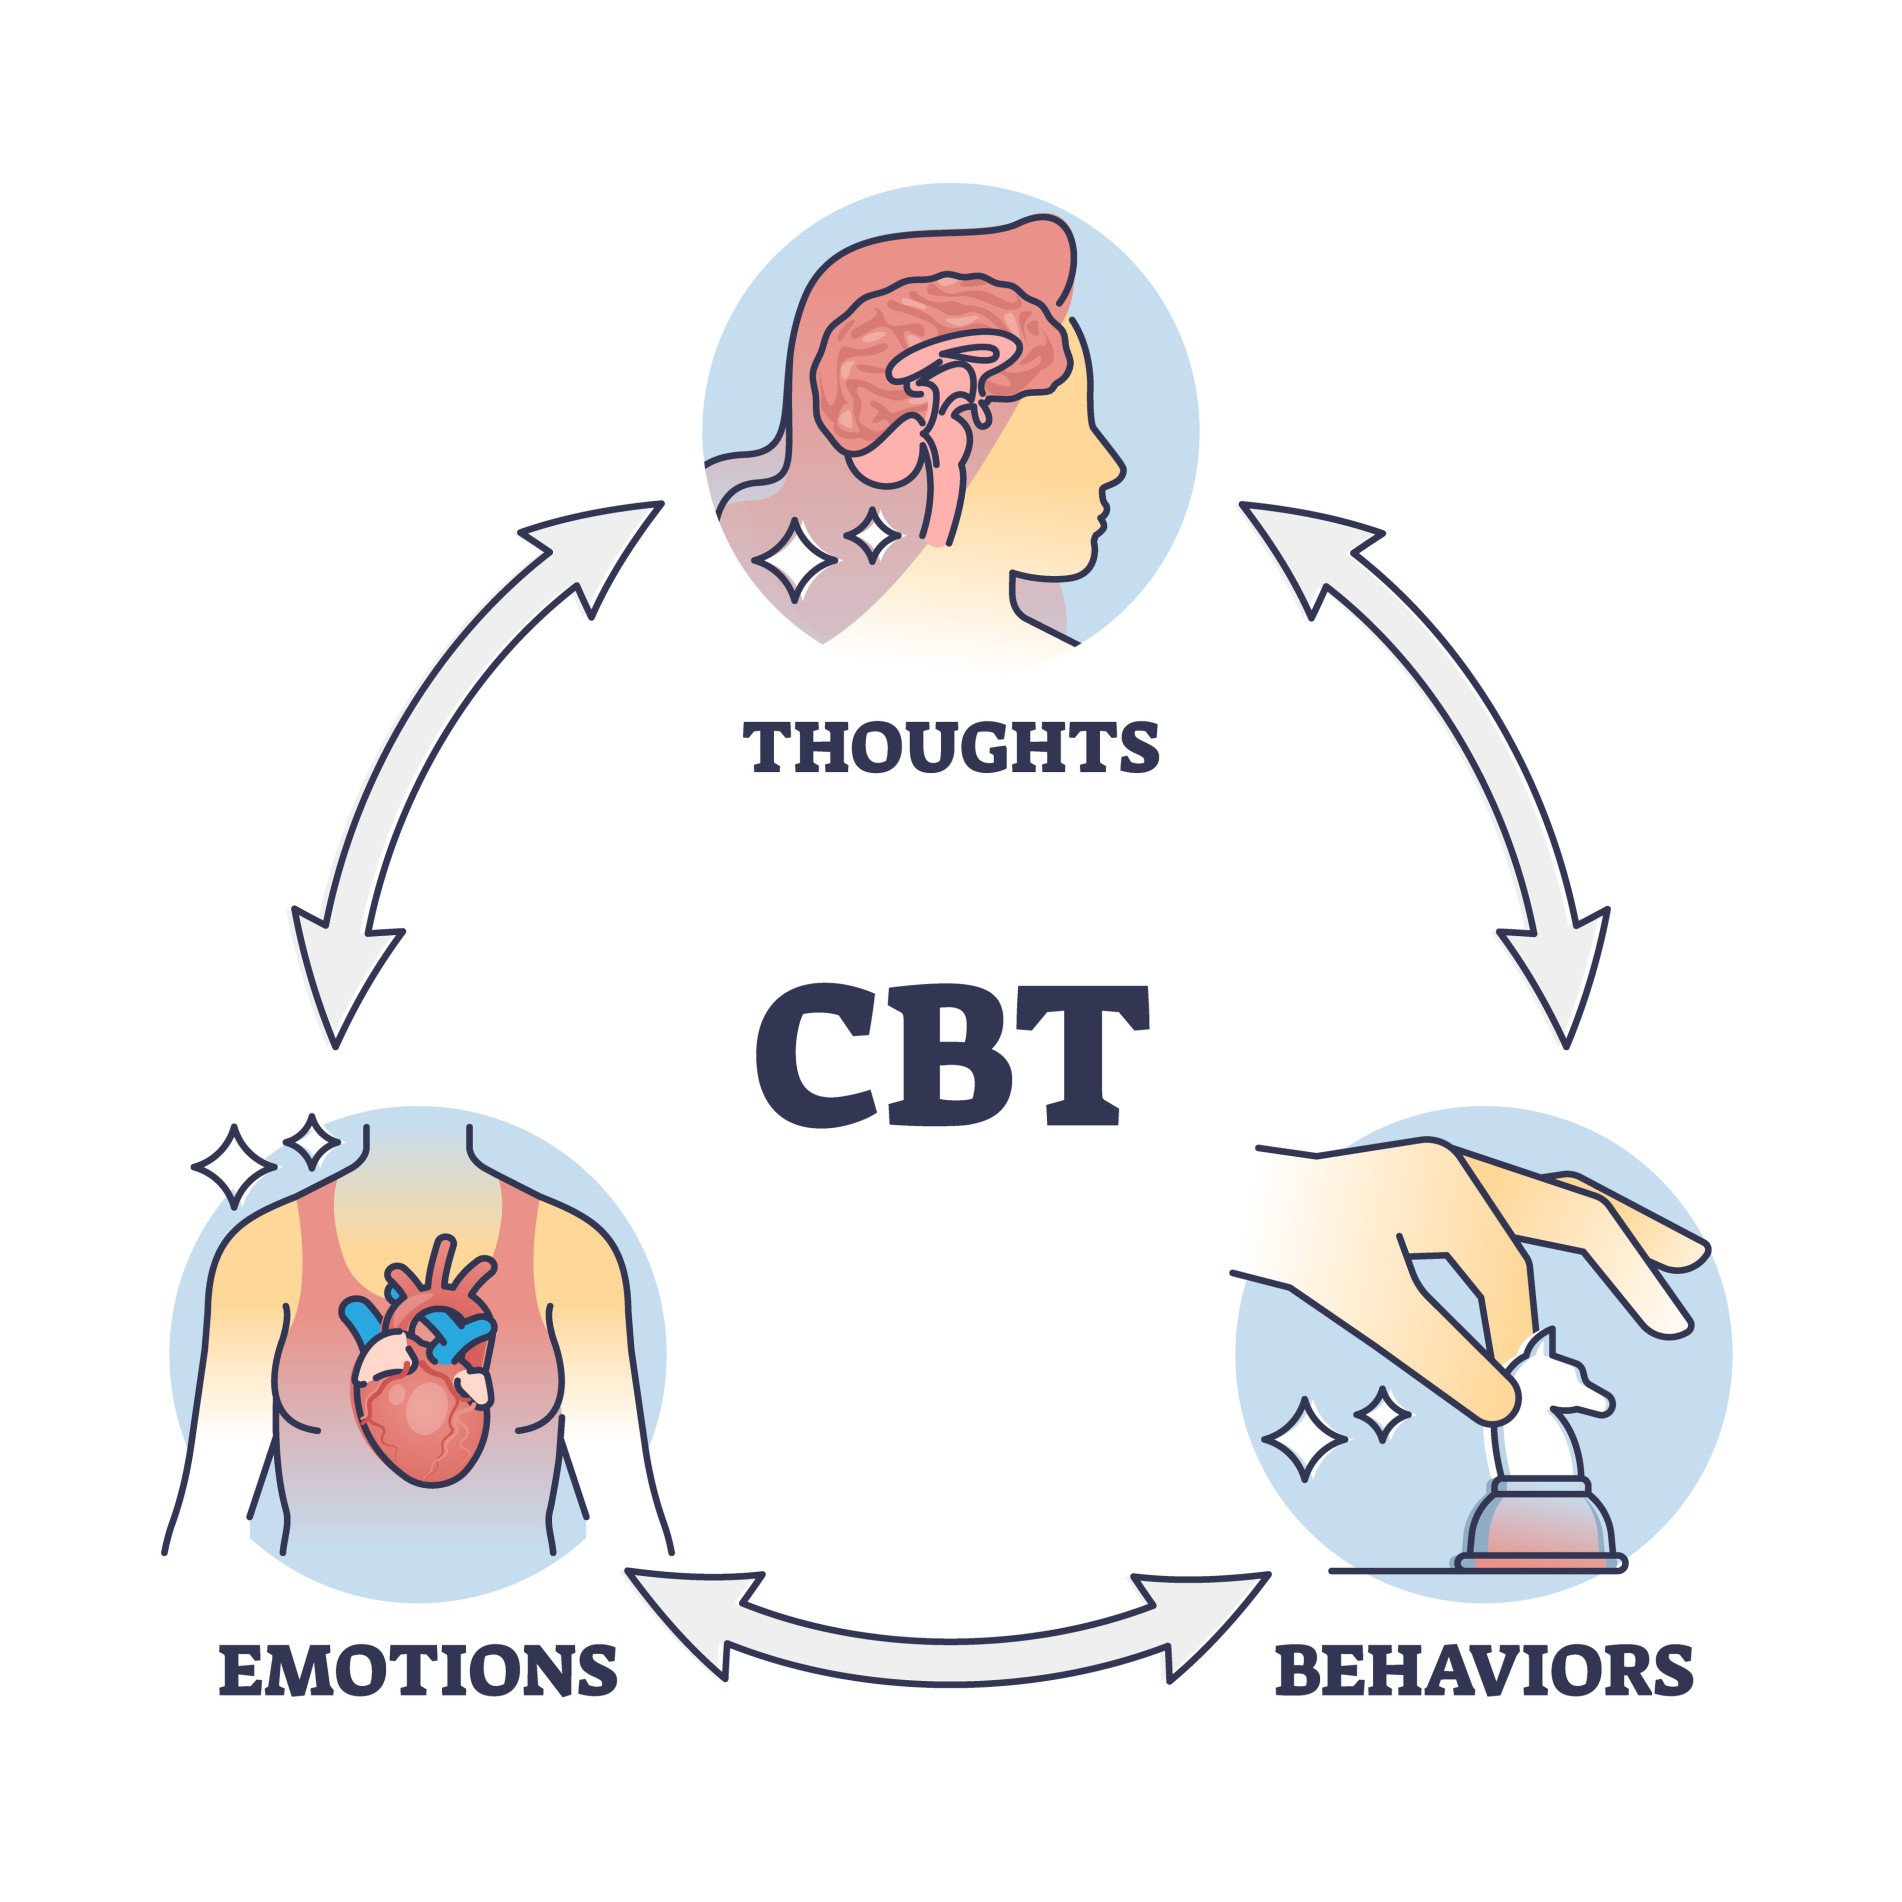 Chart explaining how thoughts, emotions, and behavior interrelate in CBT (Cognitive Behavioral Therapy)